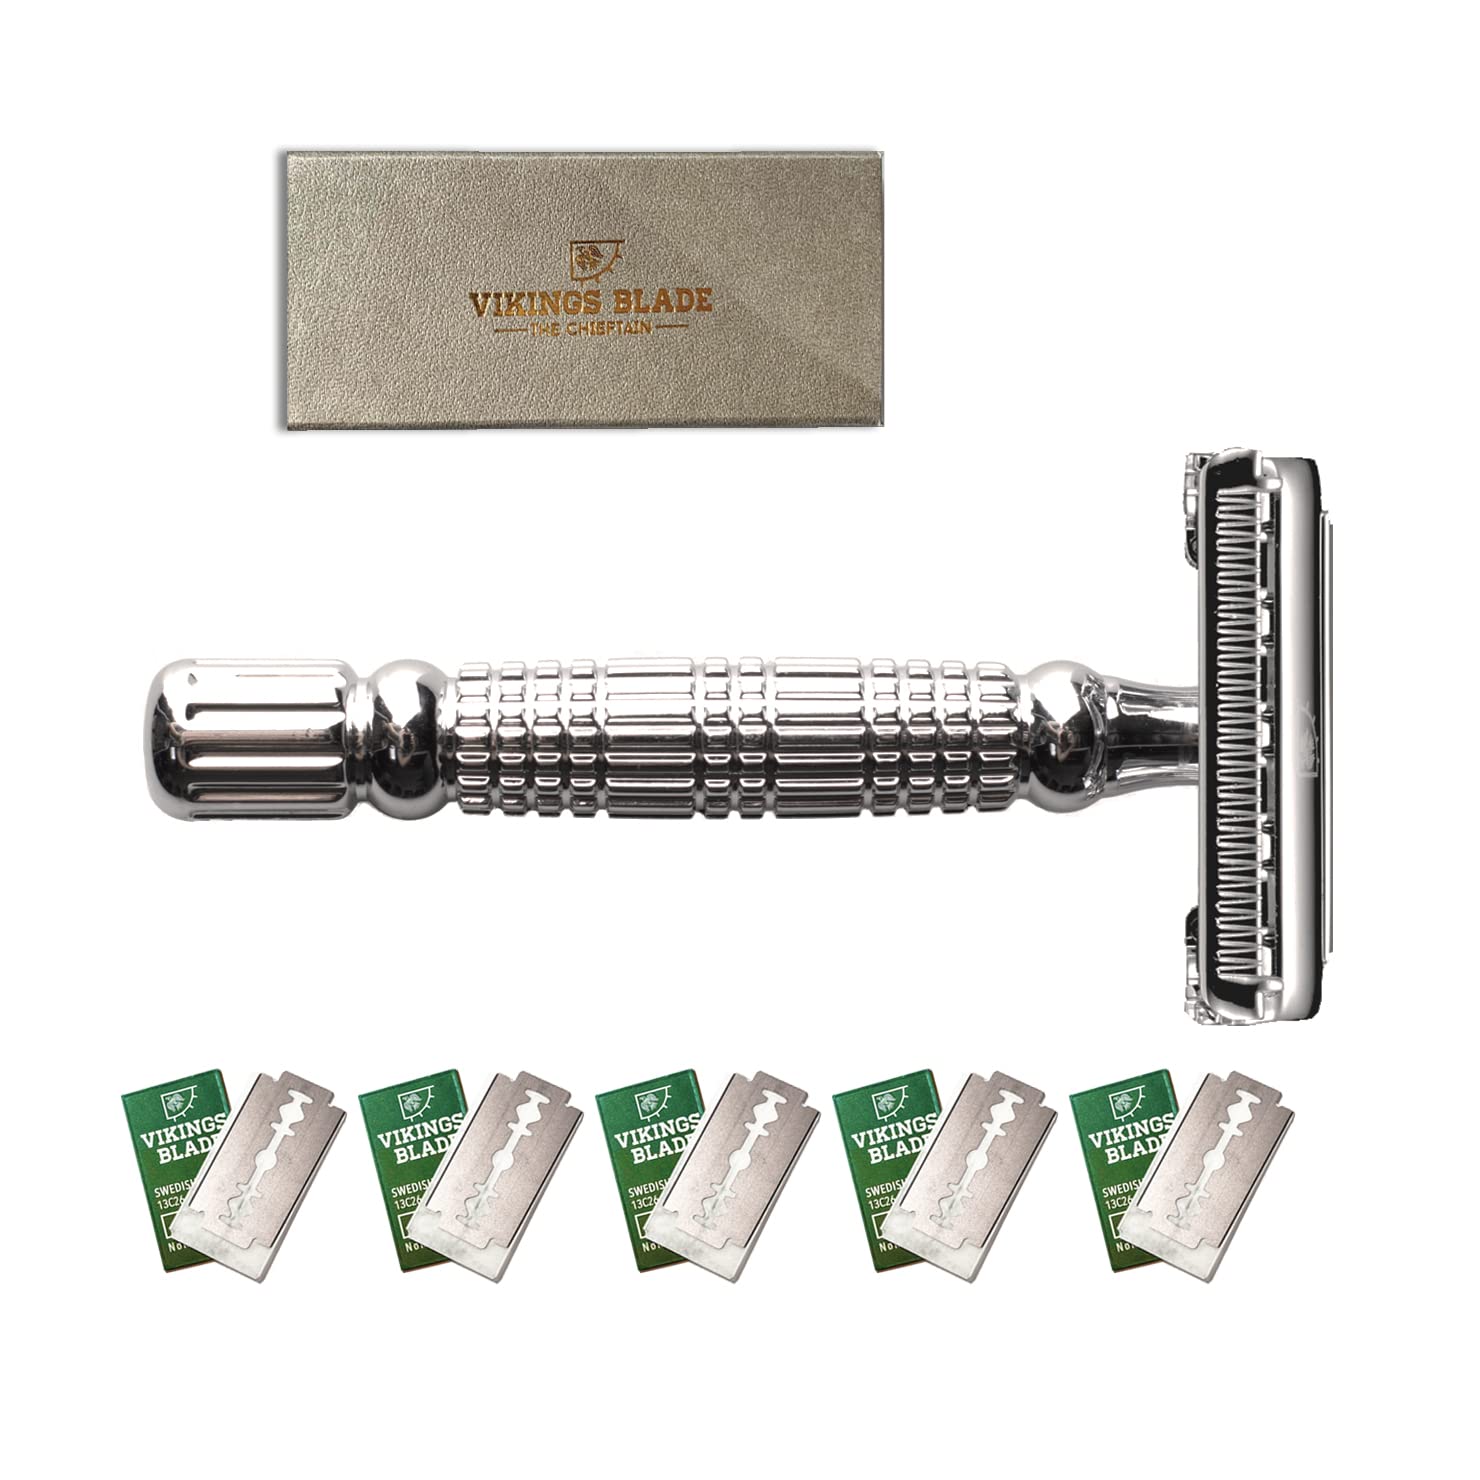 Book Cover Double Edge Safety Razor by VIKINGS BLADE, Fat & Short Handle, Swedish Steel Blades Pack + Luxury Case. Twist to Open, Heavy Duty, Reduces Razor Burn, Smooth, Close, Clean Shave (Model: The Chieftain) Chromium Silver